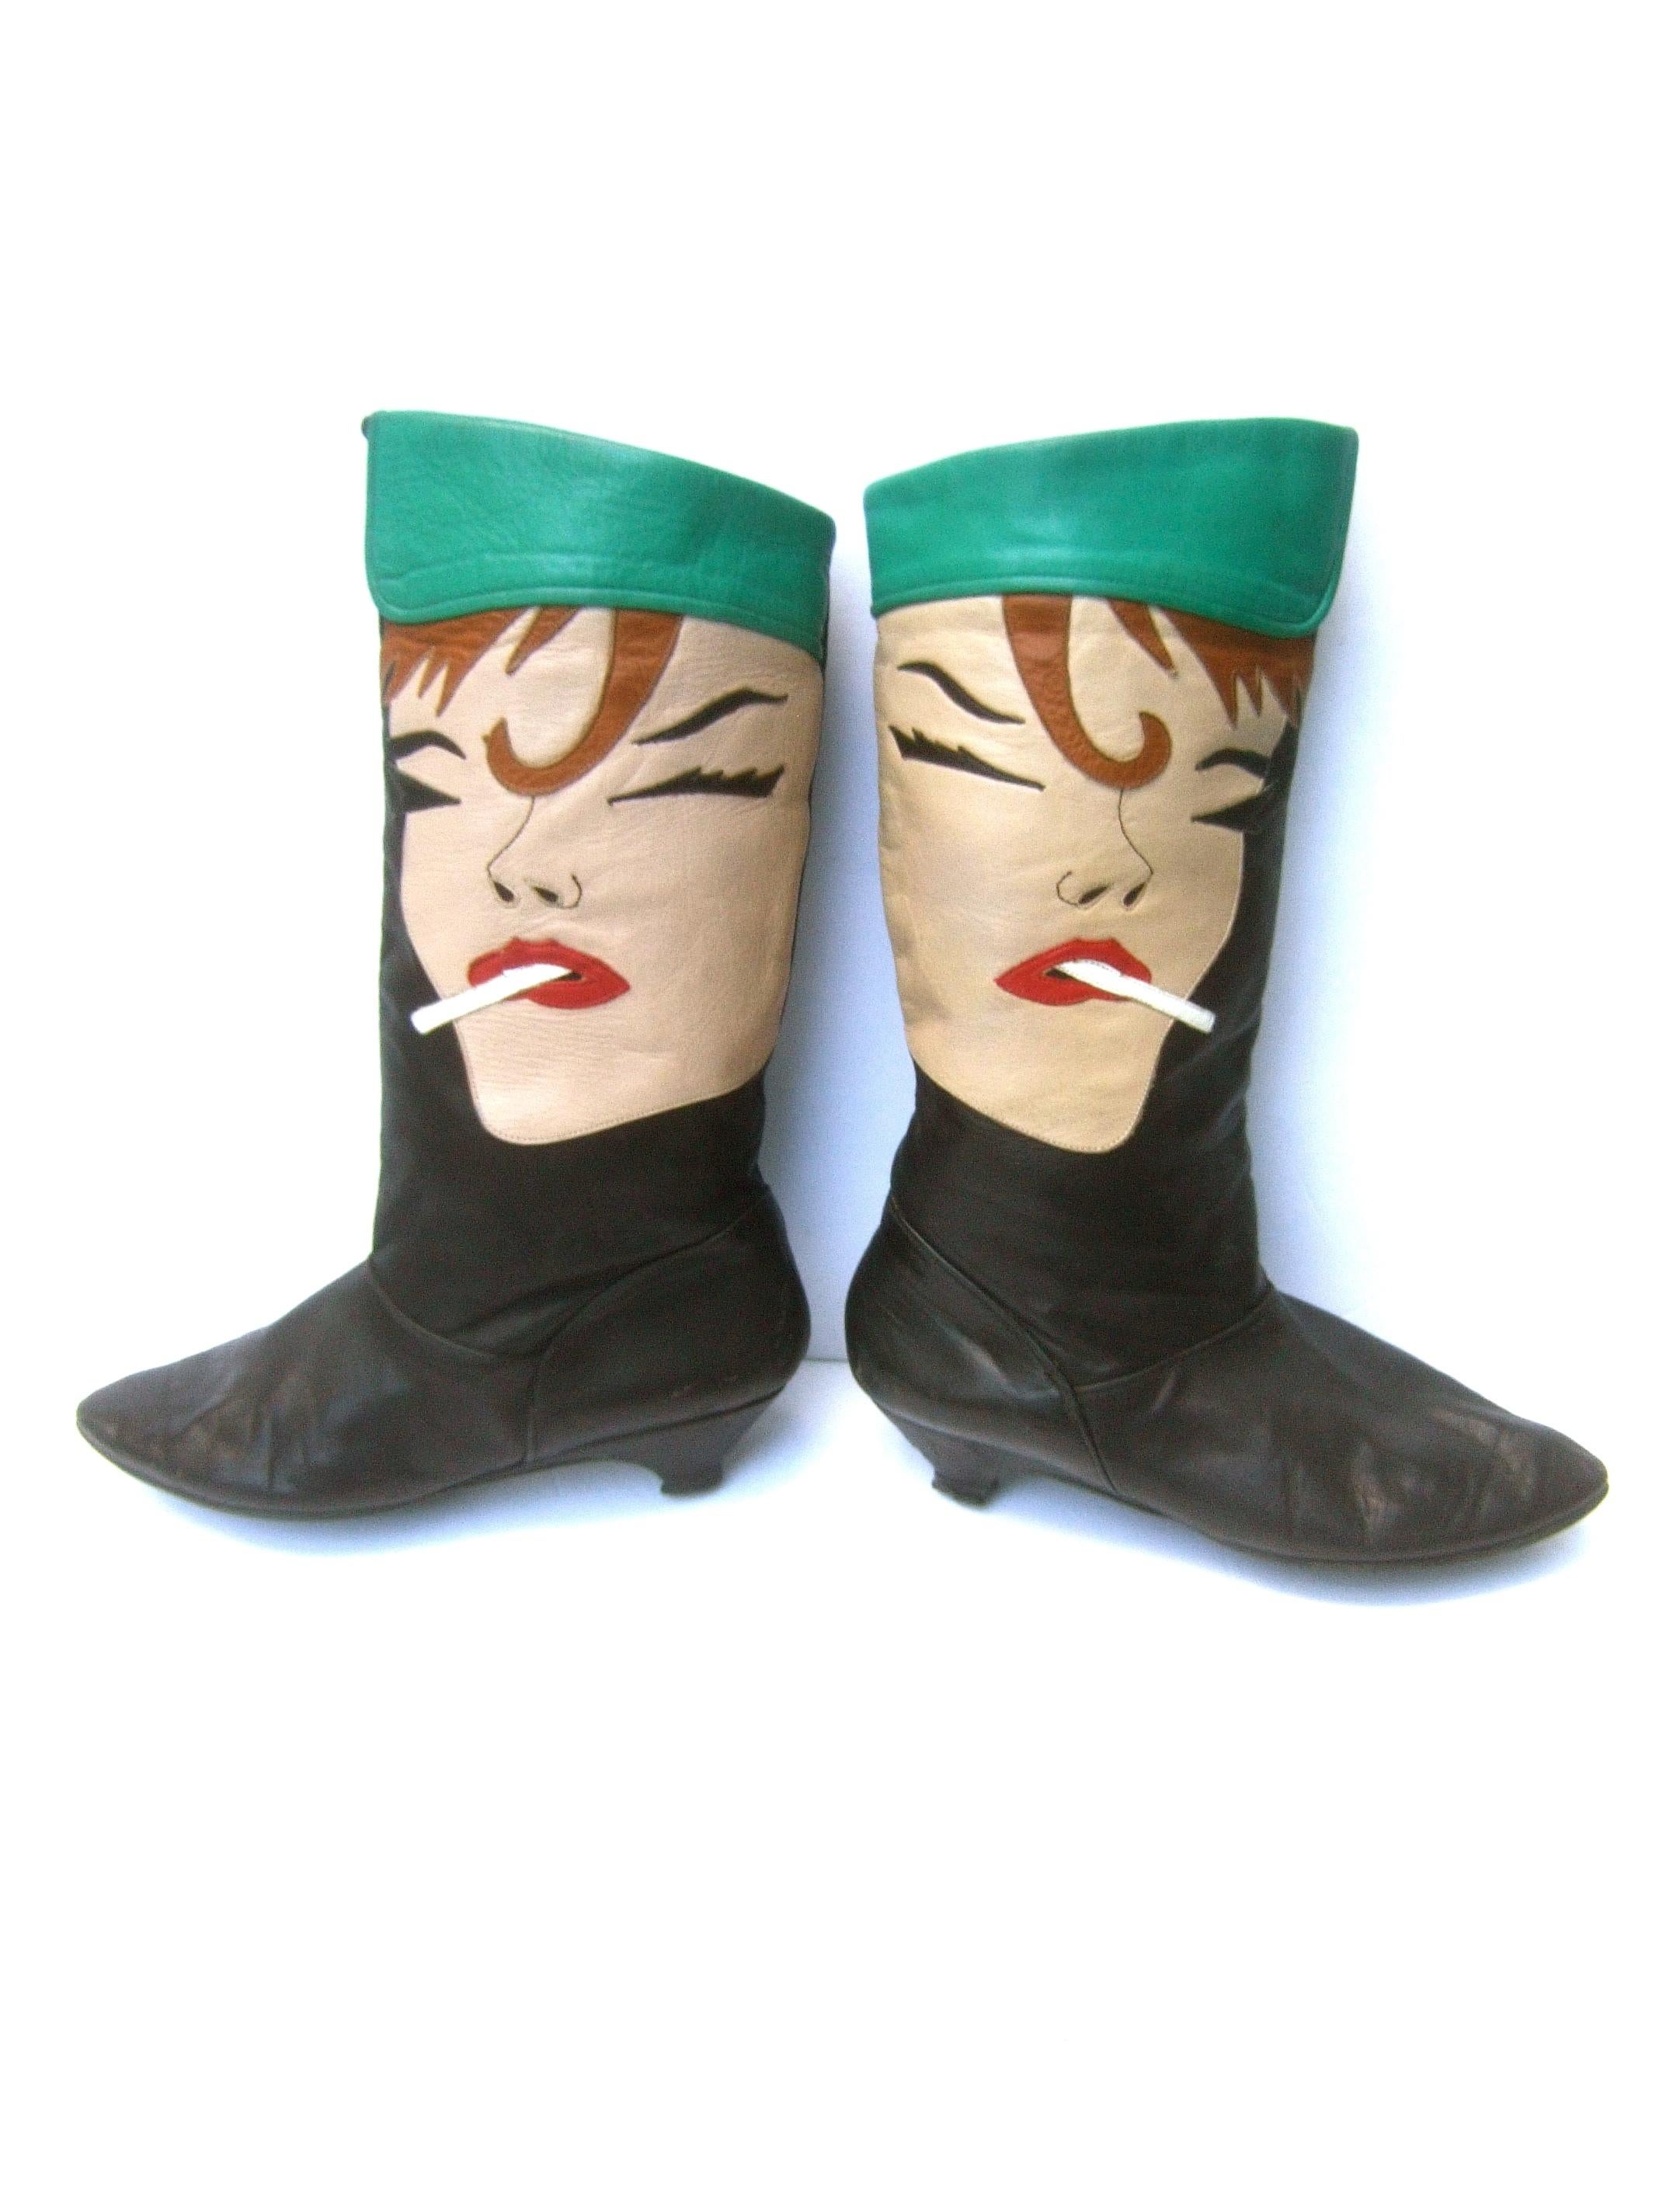 Women's Mod Edgy Pop Art Leather Boots Designed by Zalo c 1980s